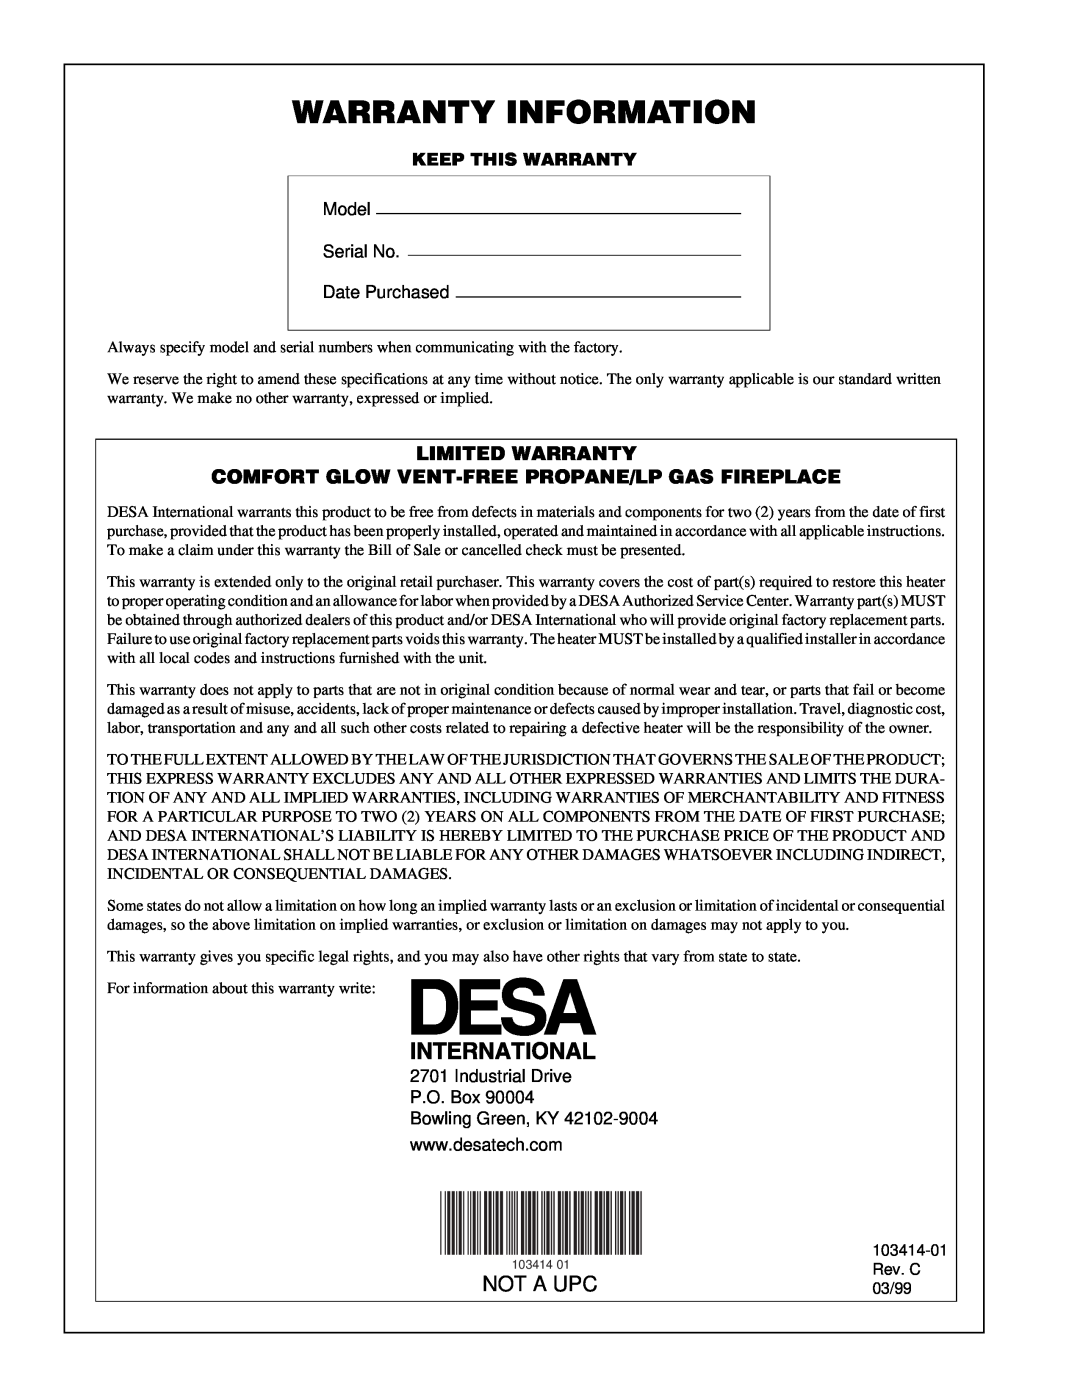 Desa CGFP28PT Warranty Information, Not A Upc, Model Serial No Date Purchased, Industrial Drive P.O. Box Bowling Green, KY 